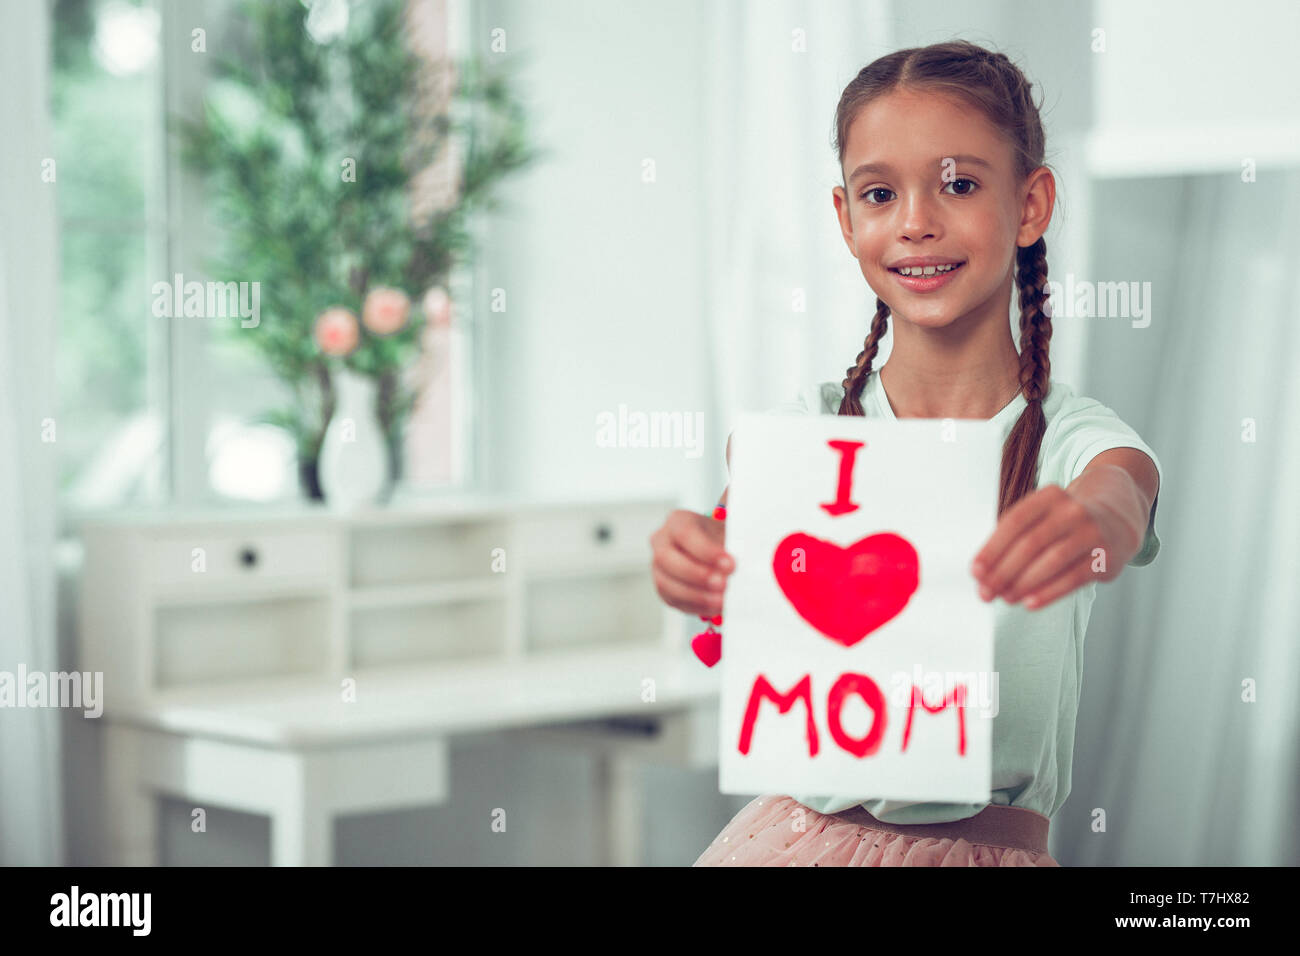 Nice-looking Afro-American girl showing picture with I love mom sign. Stock Photo